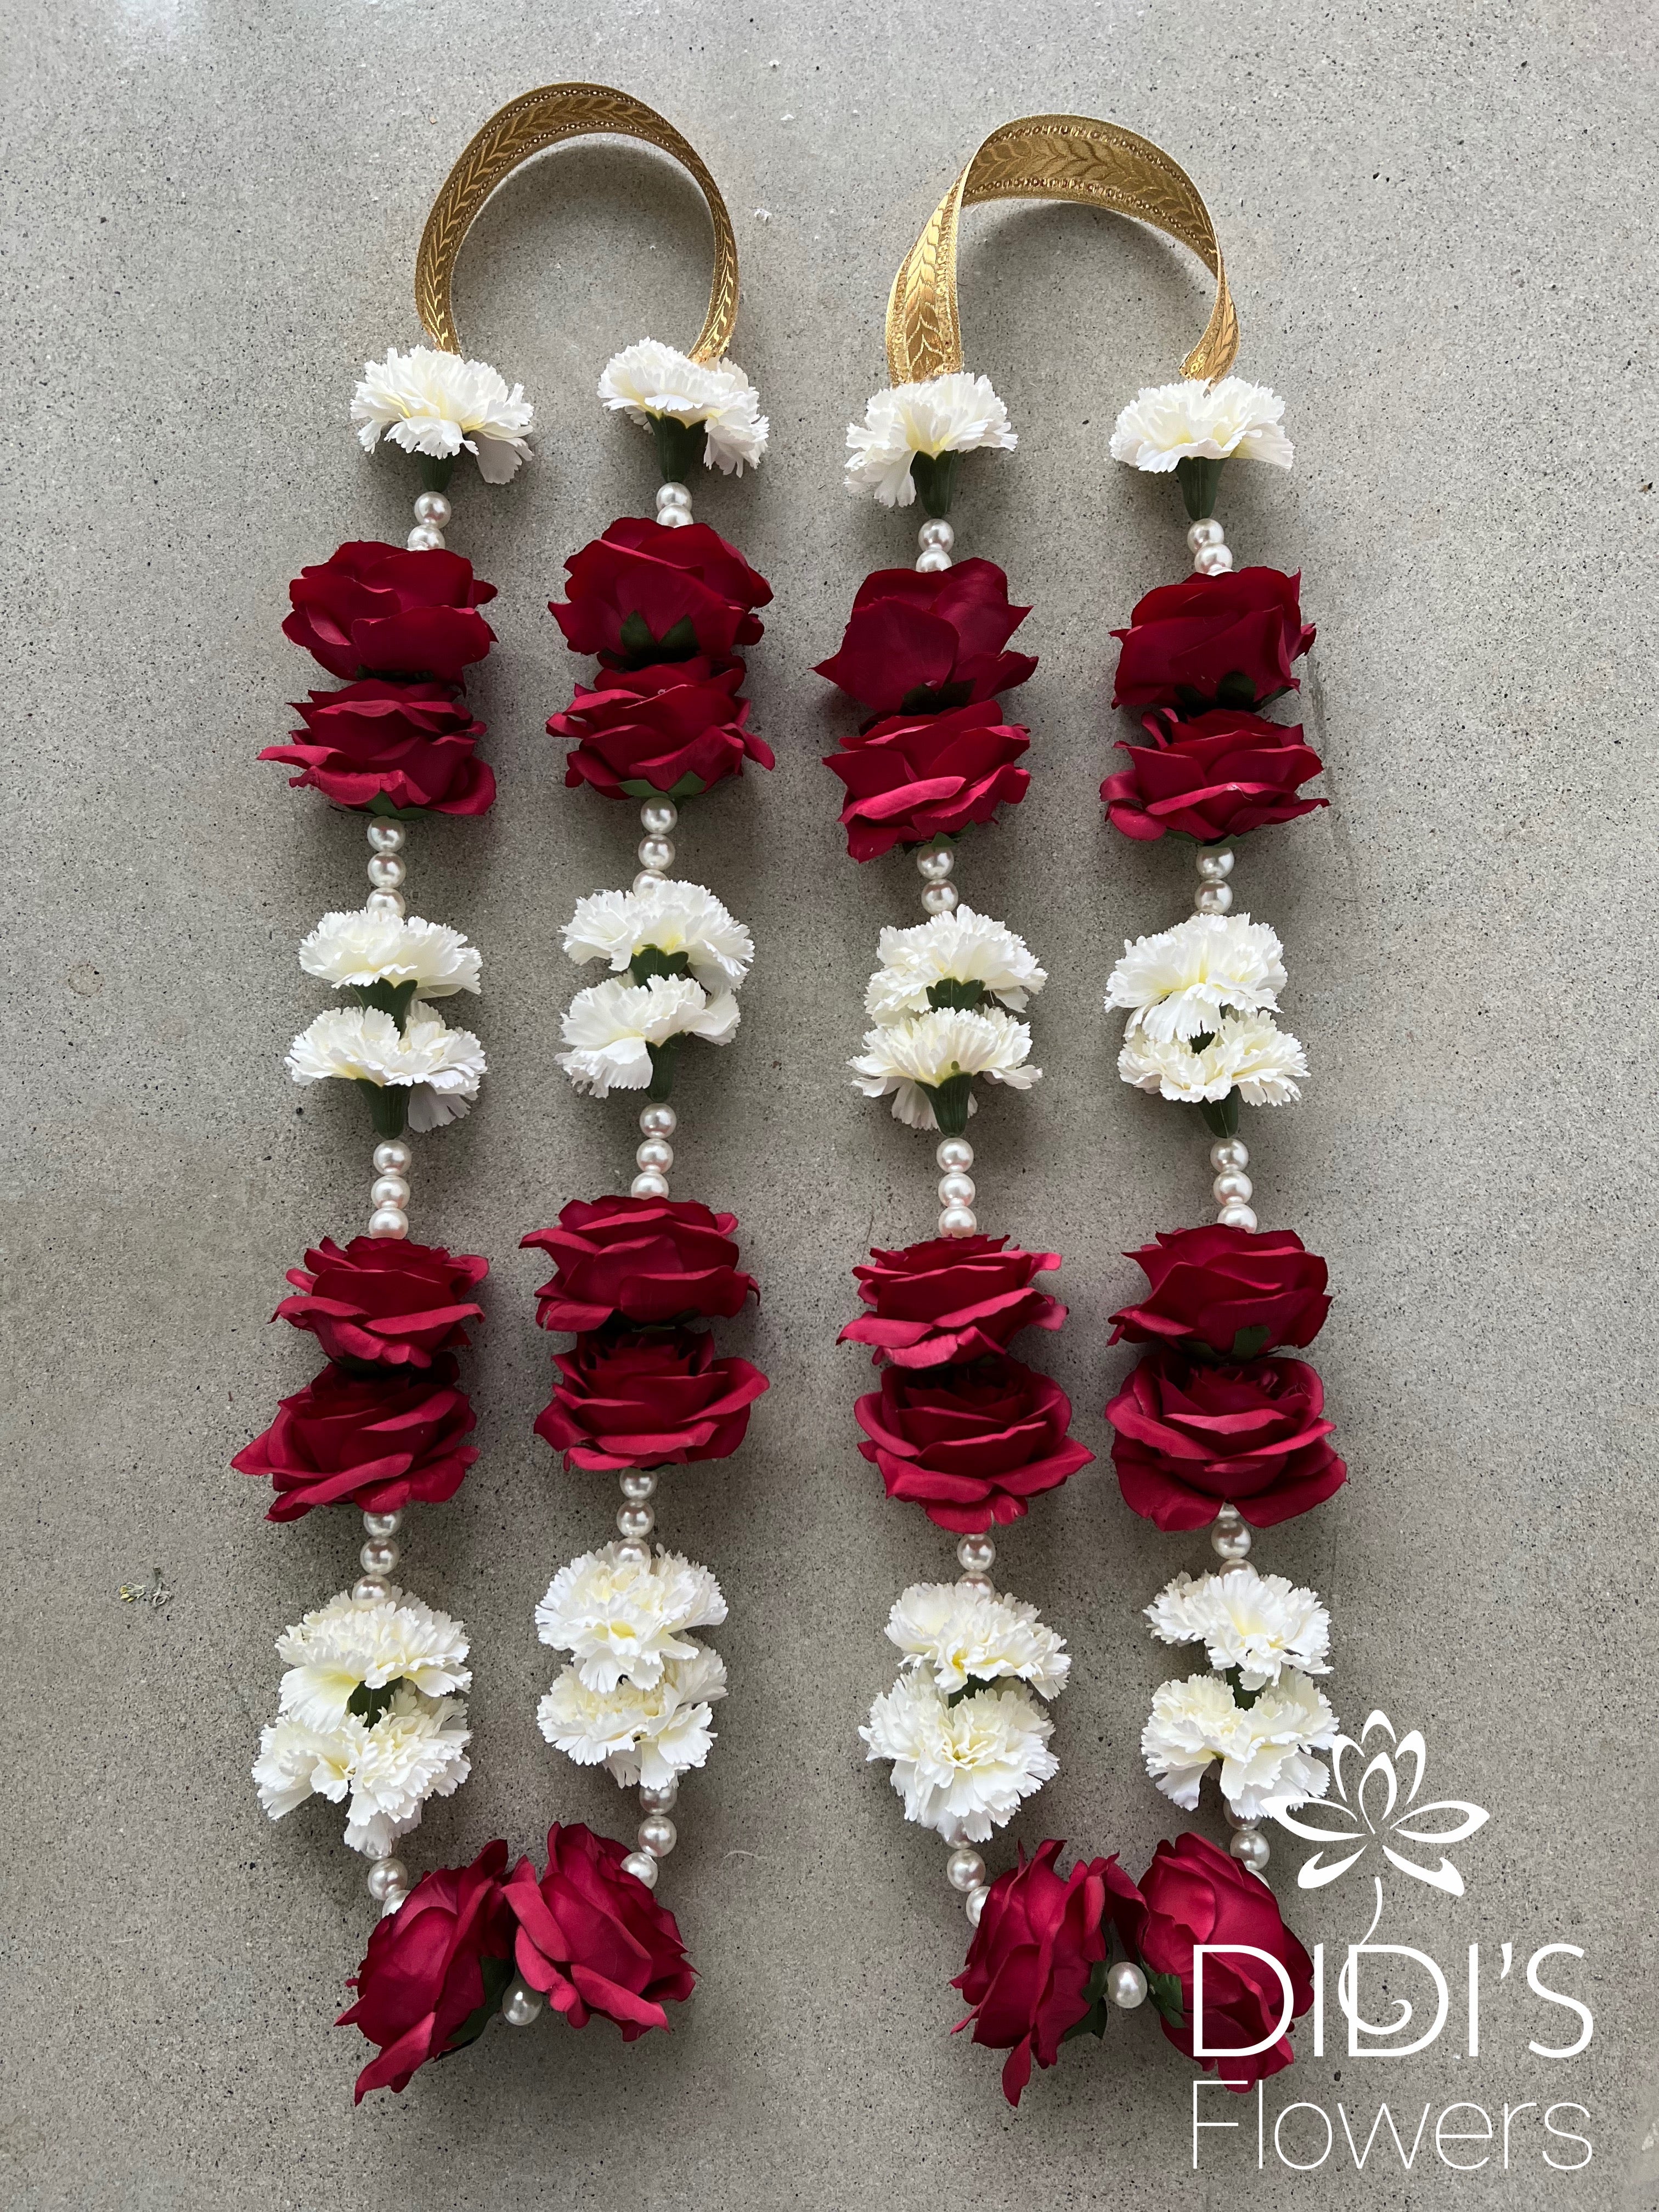 Rose and Carnations with White Pearls - Burgundy and White